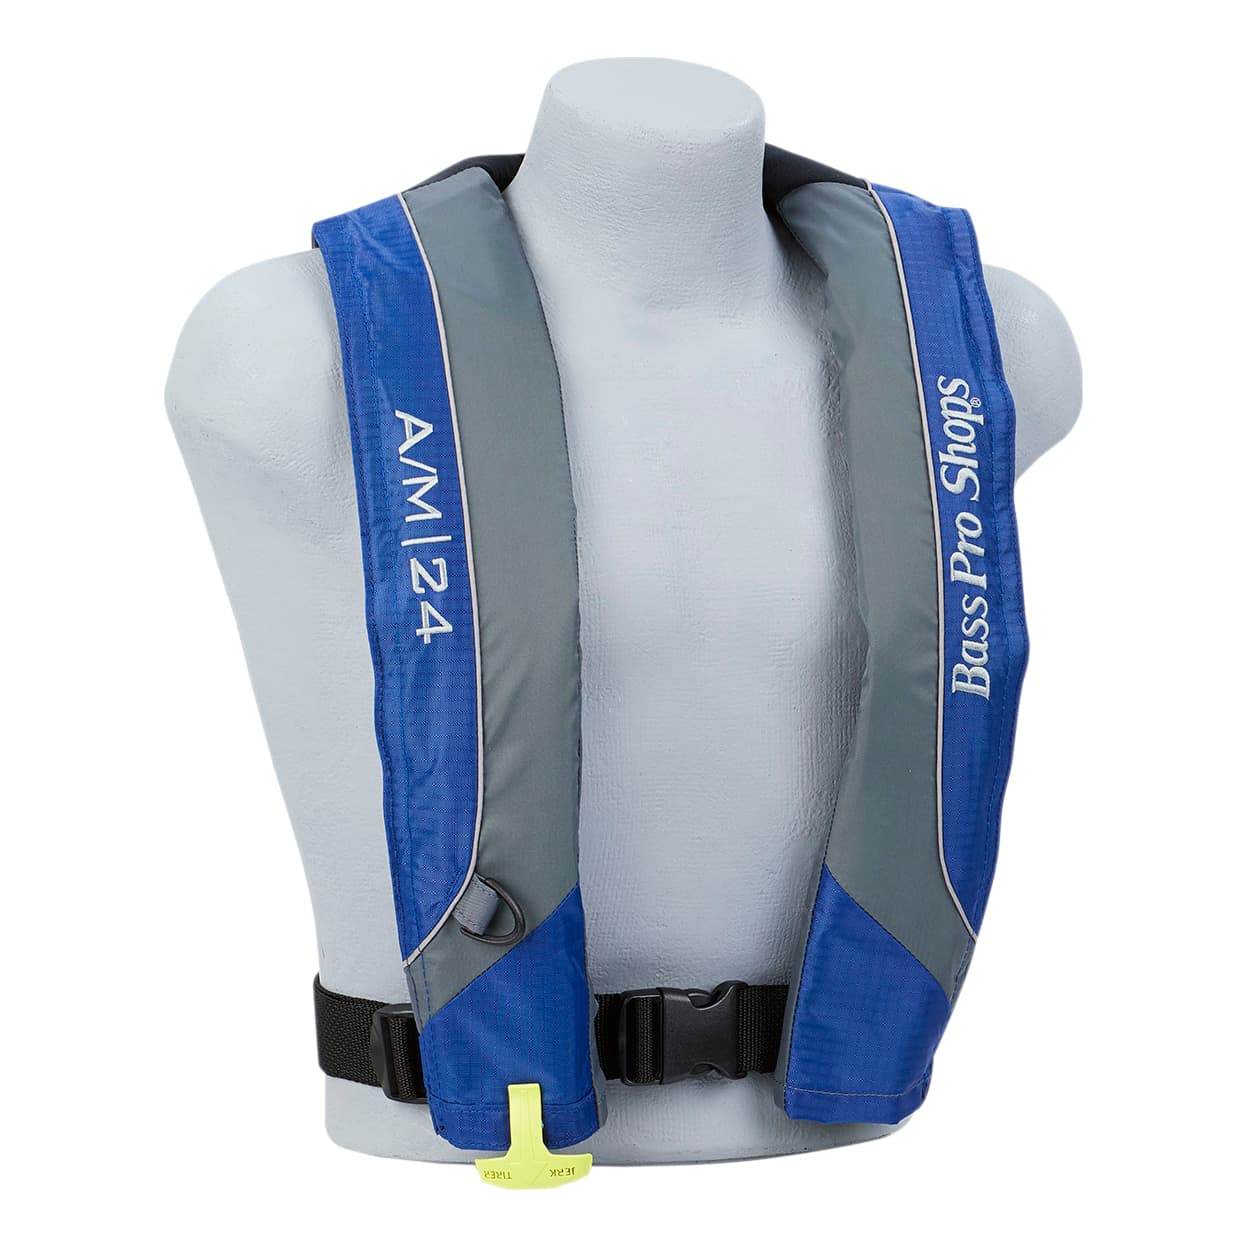 Major League Fishing featuring Onyx Inflatable Life Jackets 